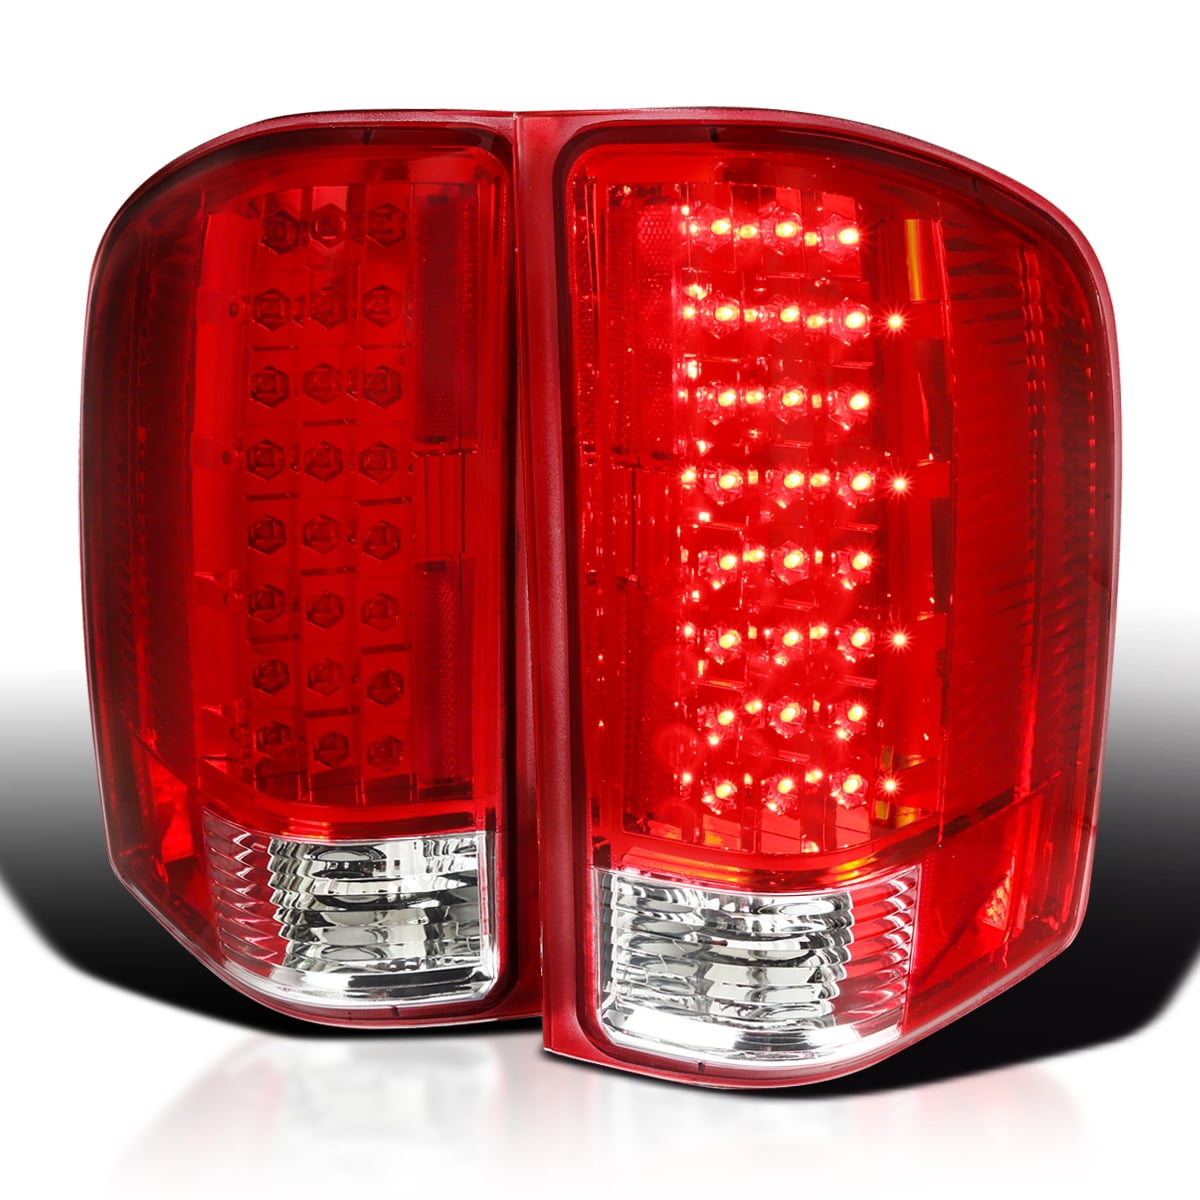 Spec-D Tuning Red Lens LED Tail Lights Compatible with 2007-2013 Chevy  Silverado 1500, 2007-2014 Chevy Silverado 2500HD/3500HD, Left + Right Pair 